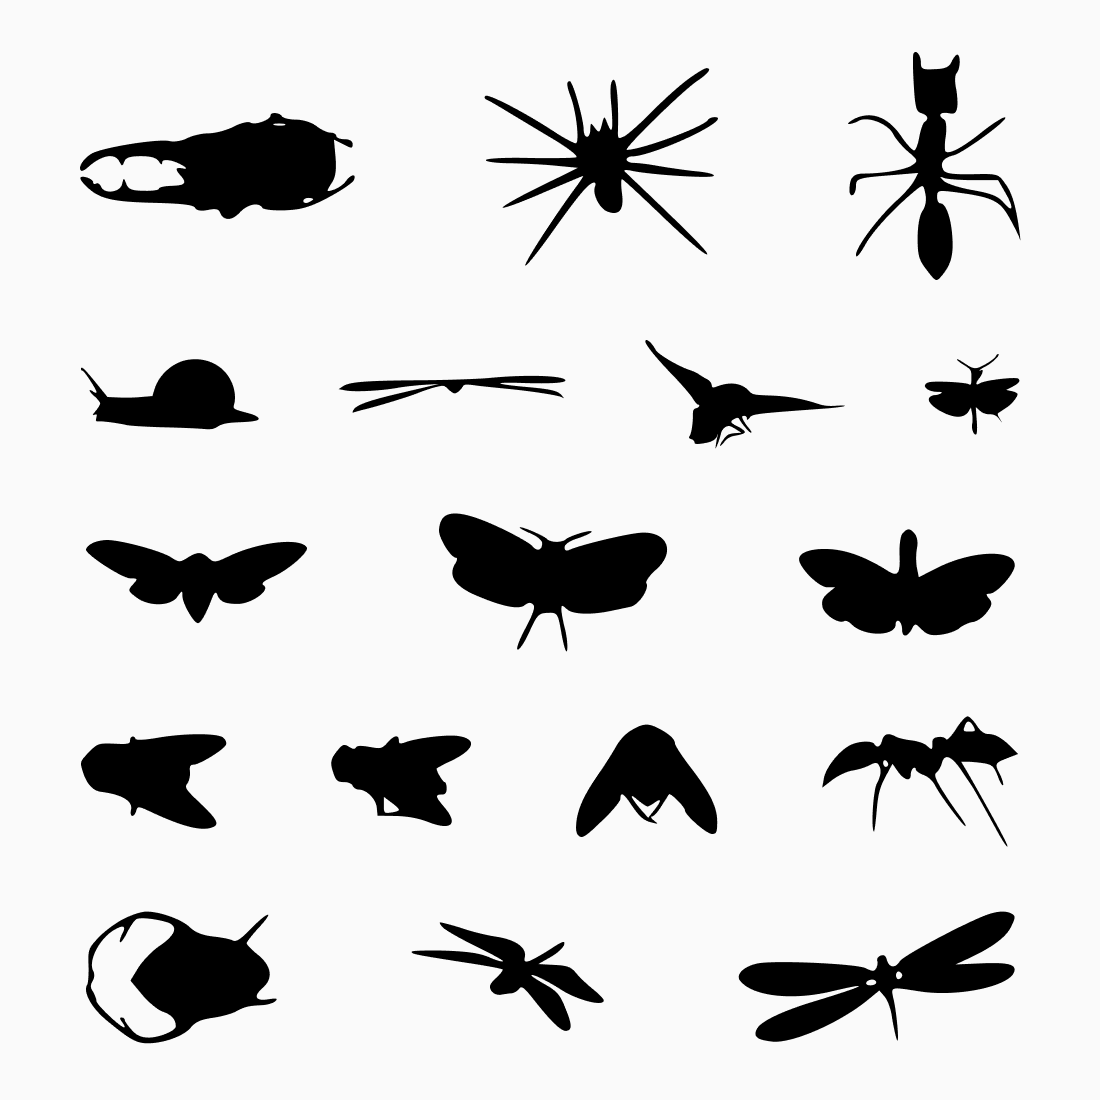 Insects SVG bundle.